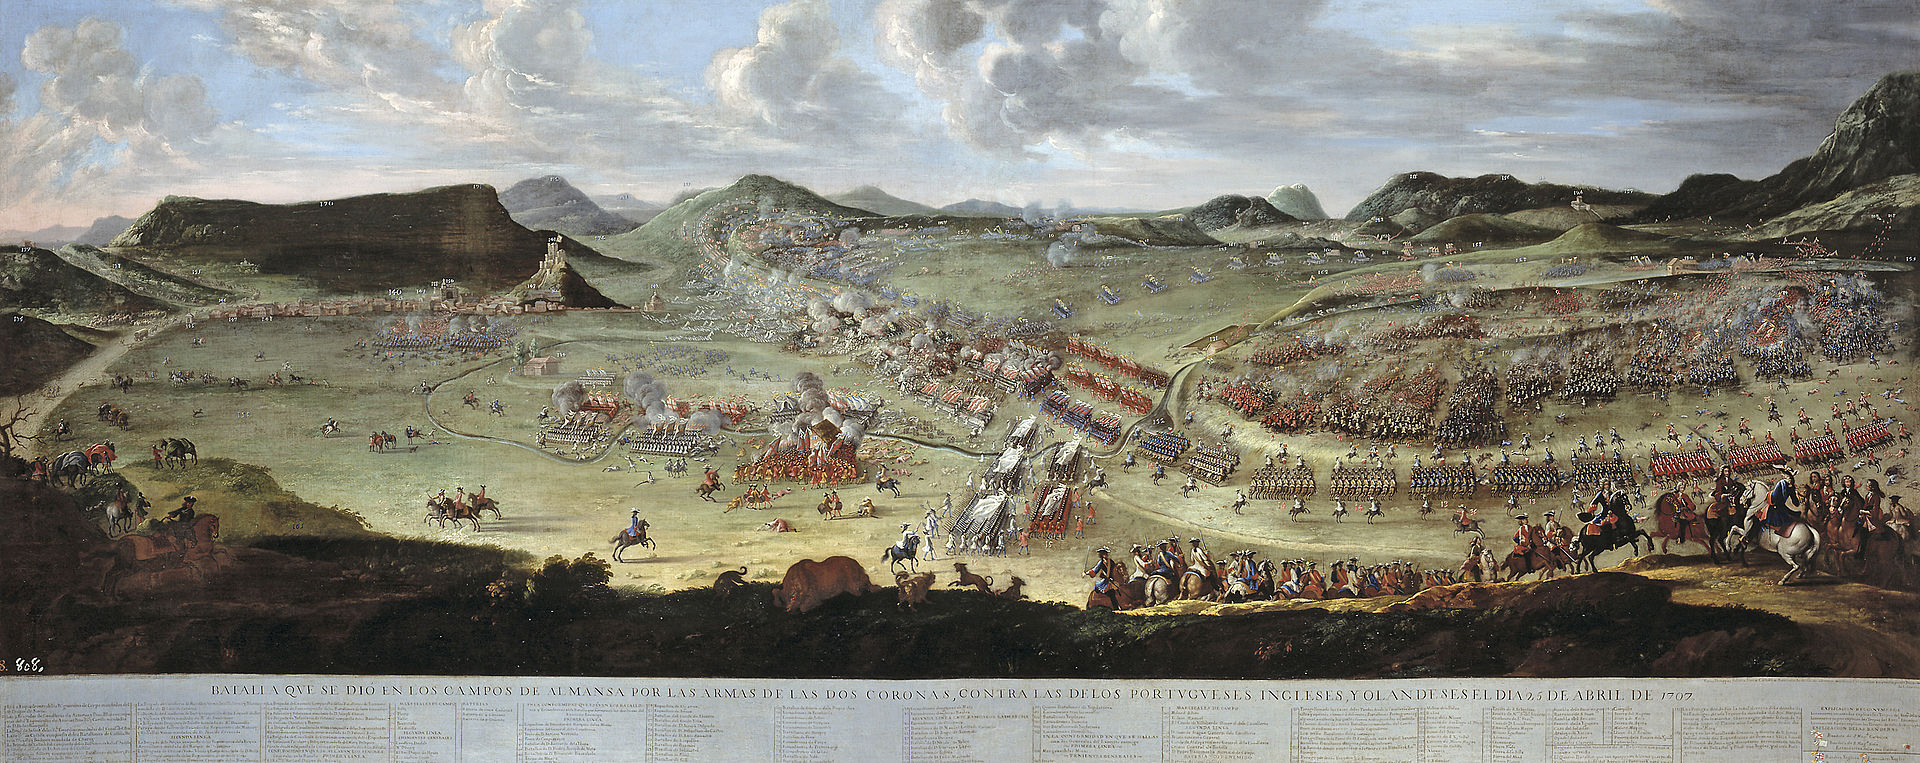 Battle of Almansa, 1707. The victory of the Franco-Spanish Bourbon army at Almansa in Spain was a serious setback for the Grand Alliance